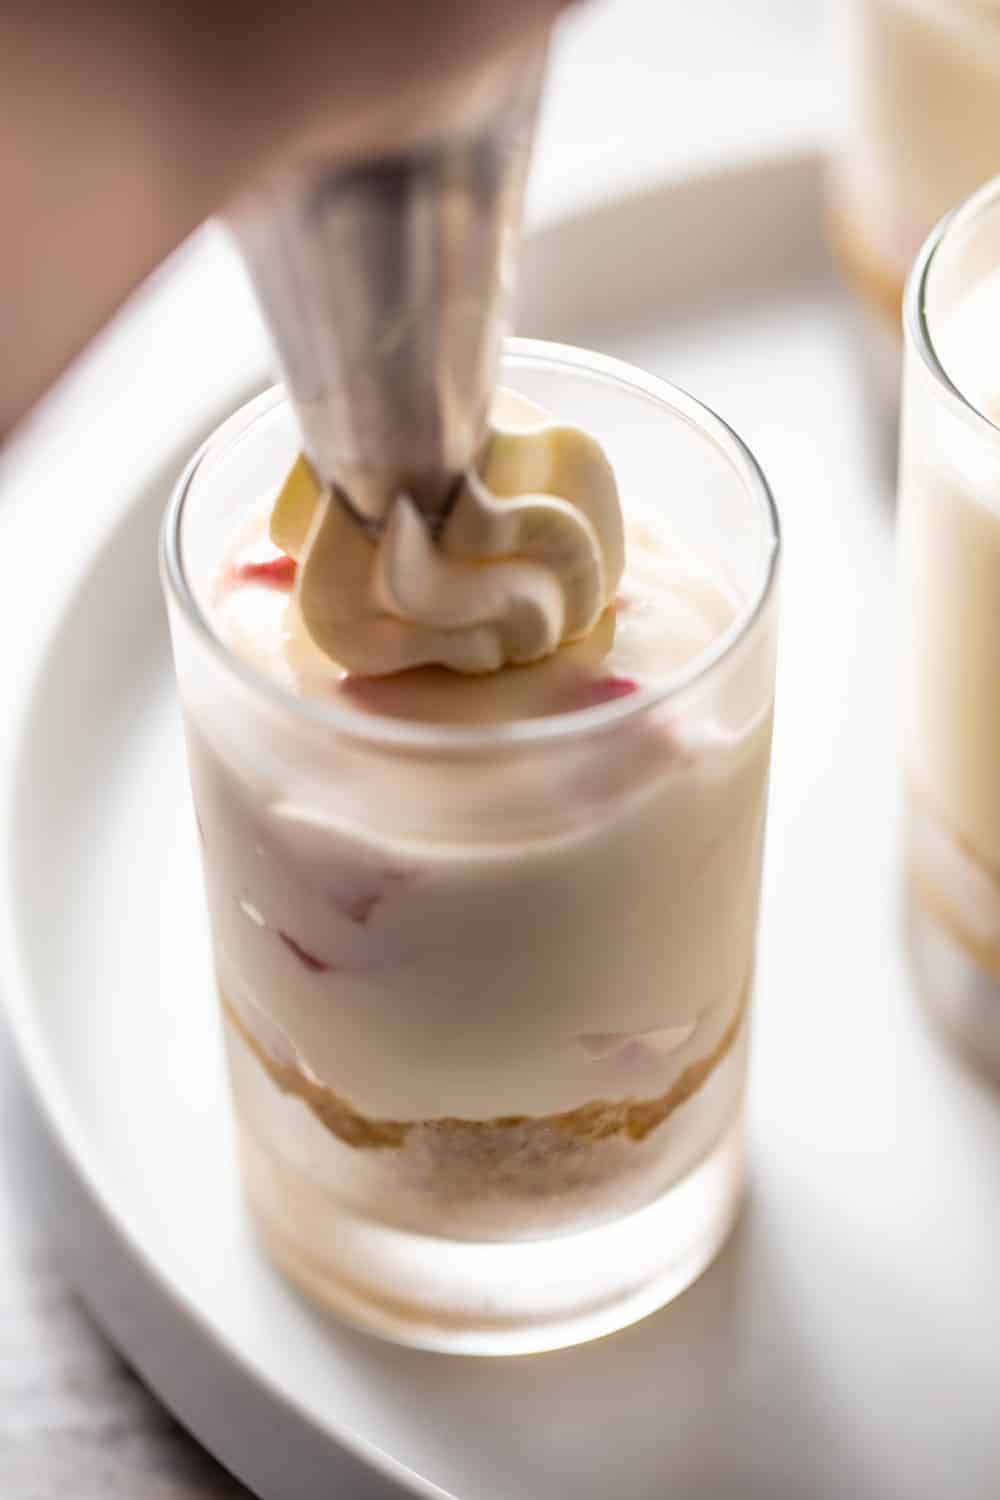 Piping bag piping whipped cream onto no-bake strawberry cheesecake in a shot glass